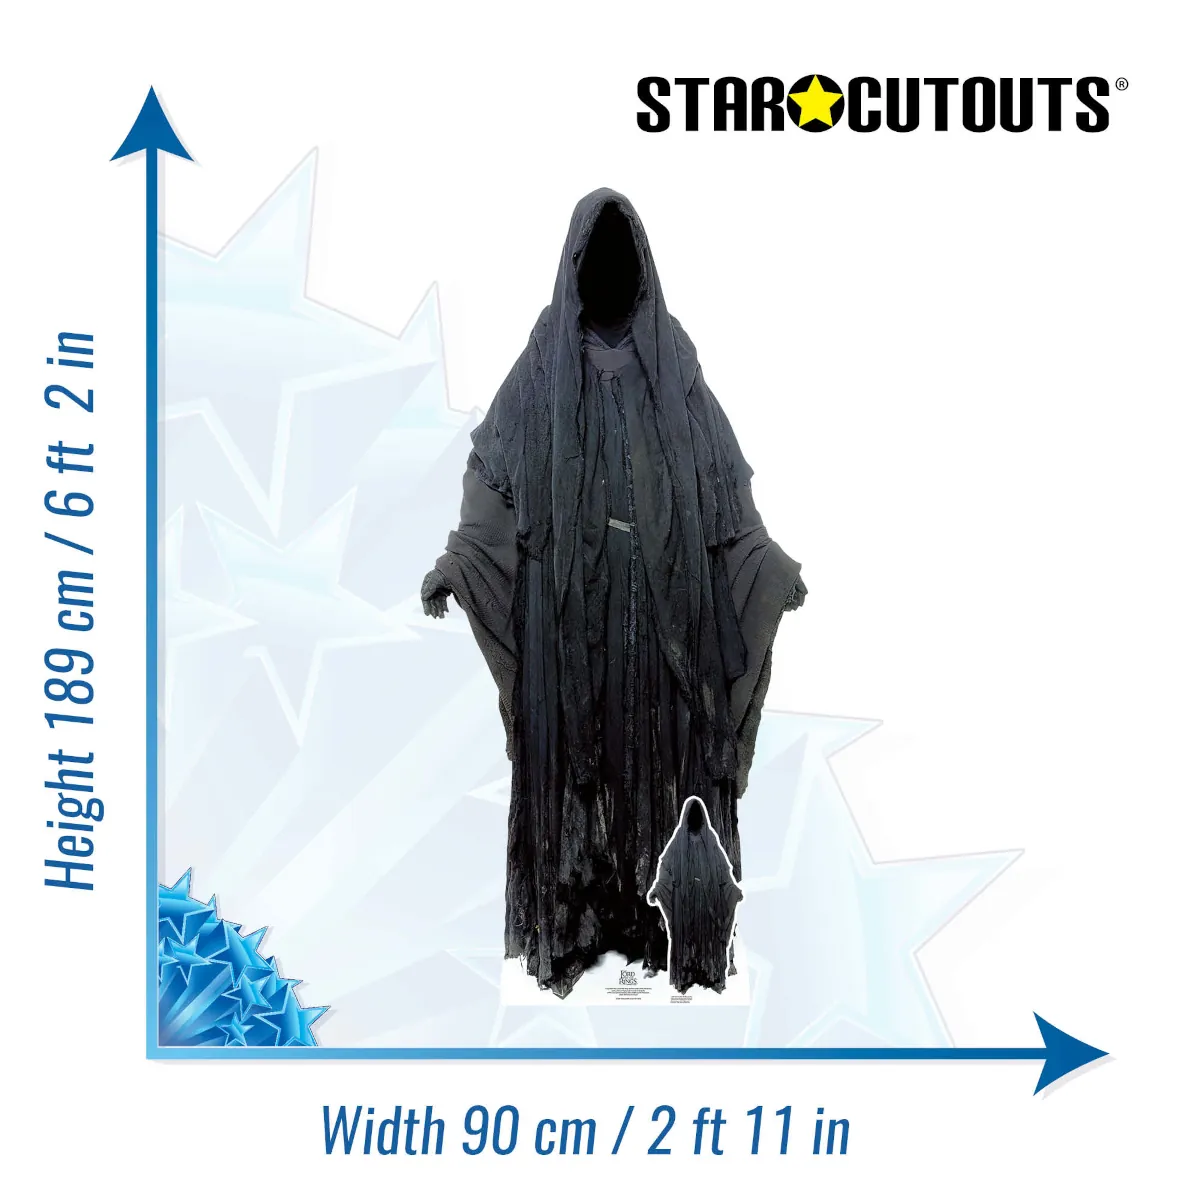 SC4201 Nazgûl 'Ringwraith' (The Lord of the Rings) Lifesize + Mini Cardboard Cutout Standee Size